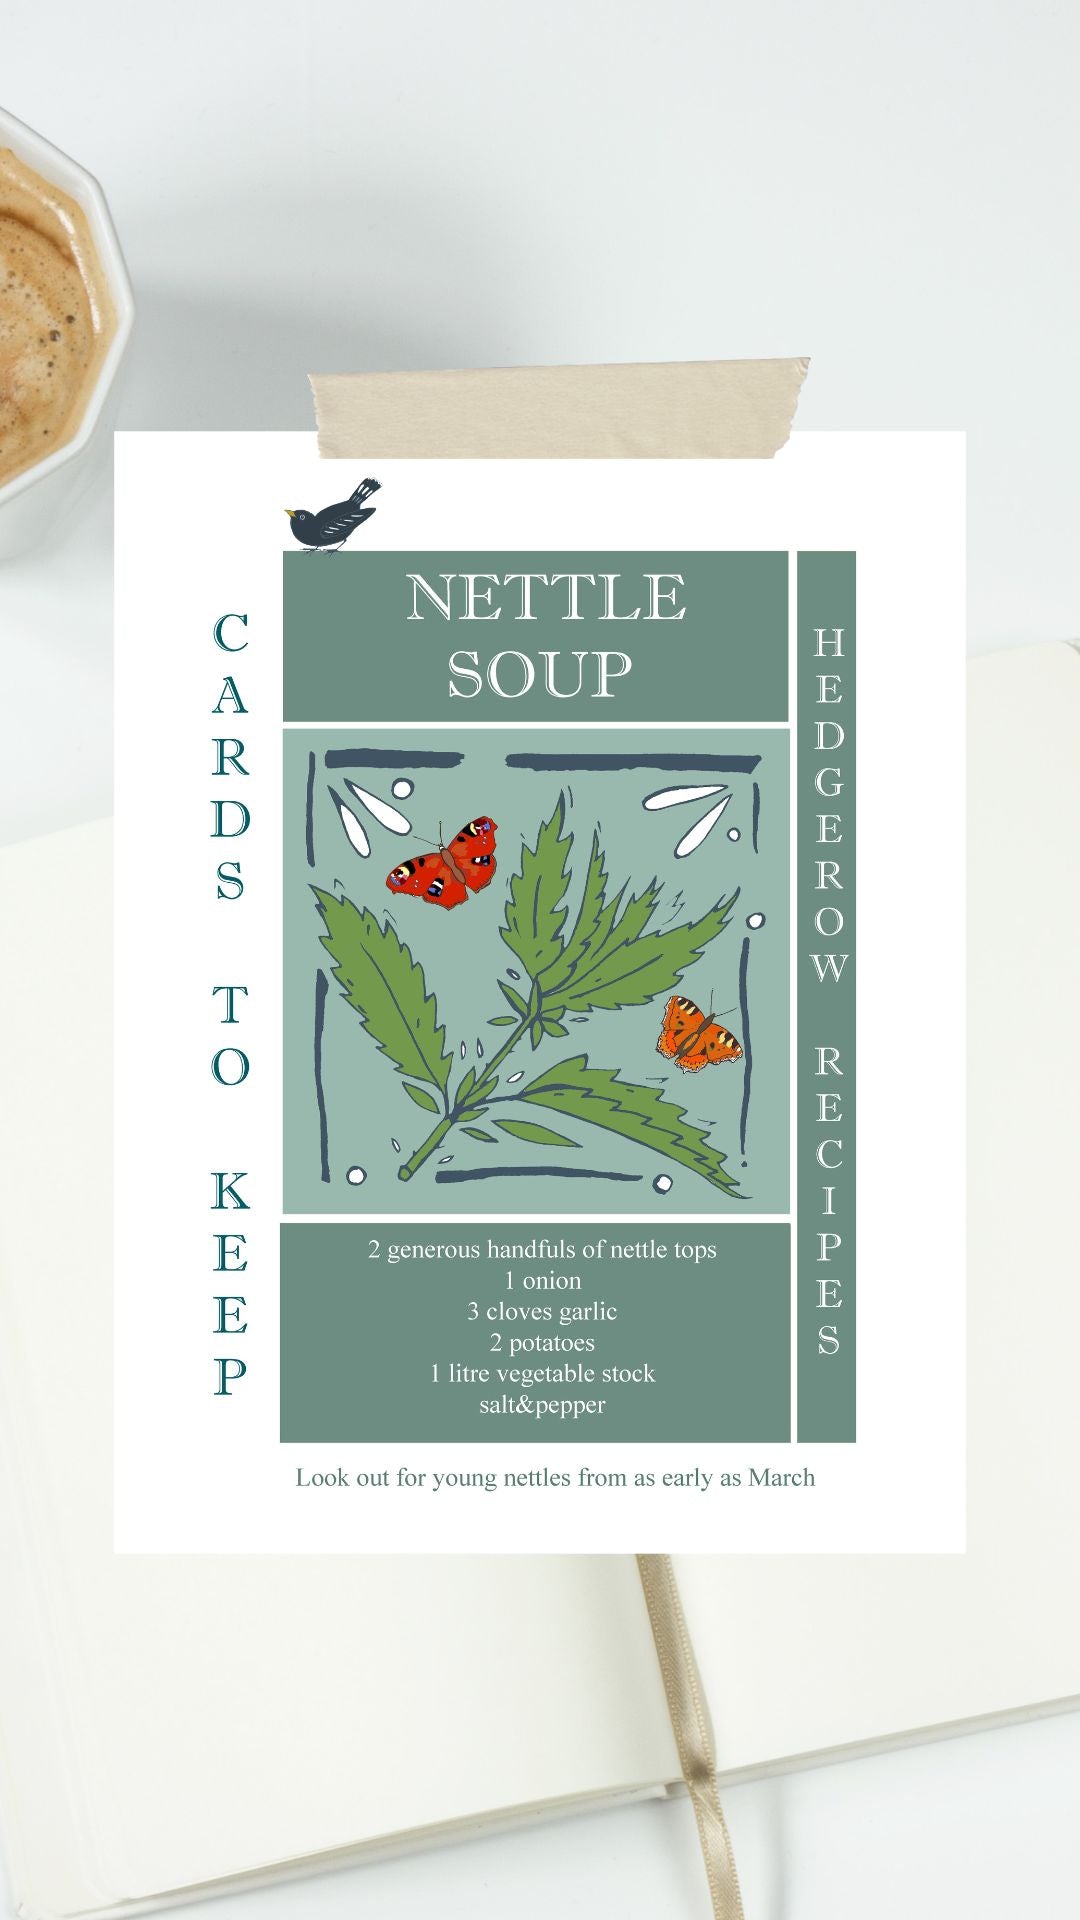 DOWNLOAD AND PRINT YOUR OWN RECIPE CARD - SPRING NETTLE SOUP